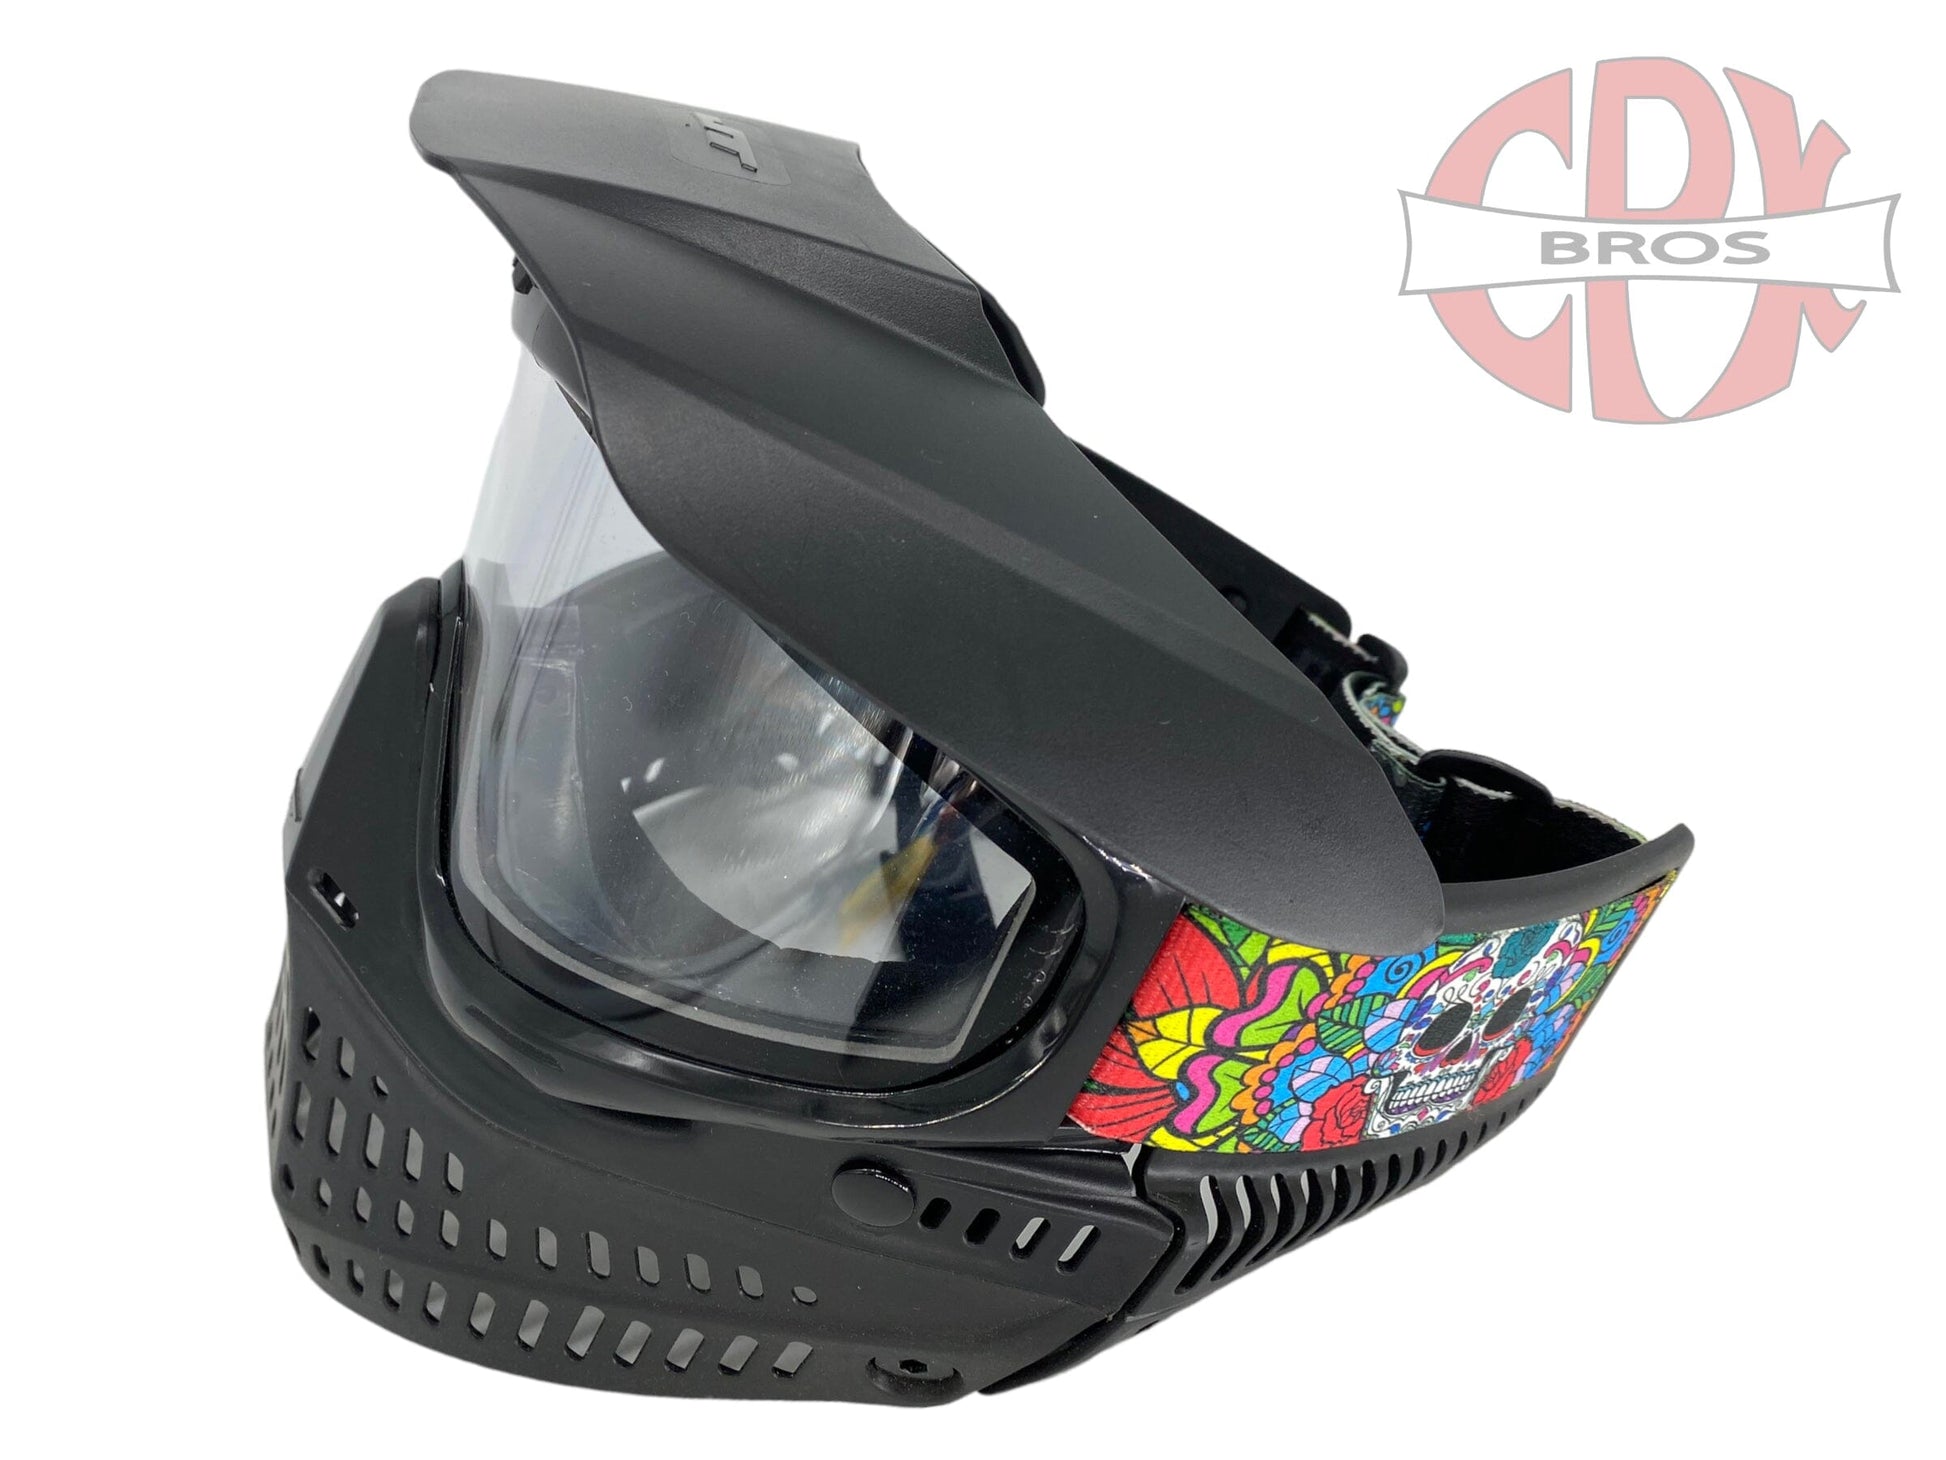 Used Jt Pro-flex Paintball Goggle Mask Paintball Gun from CPXBrosPaintball Buy/Sell/Trade Paintball Markers, Paintball Hoppers, Paintball Masks, and Hormesis Headbands